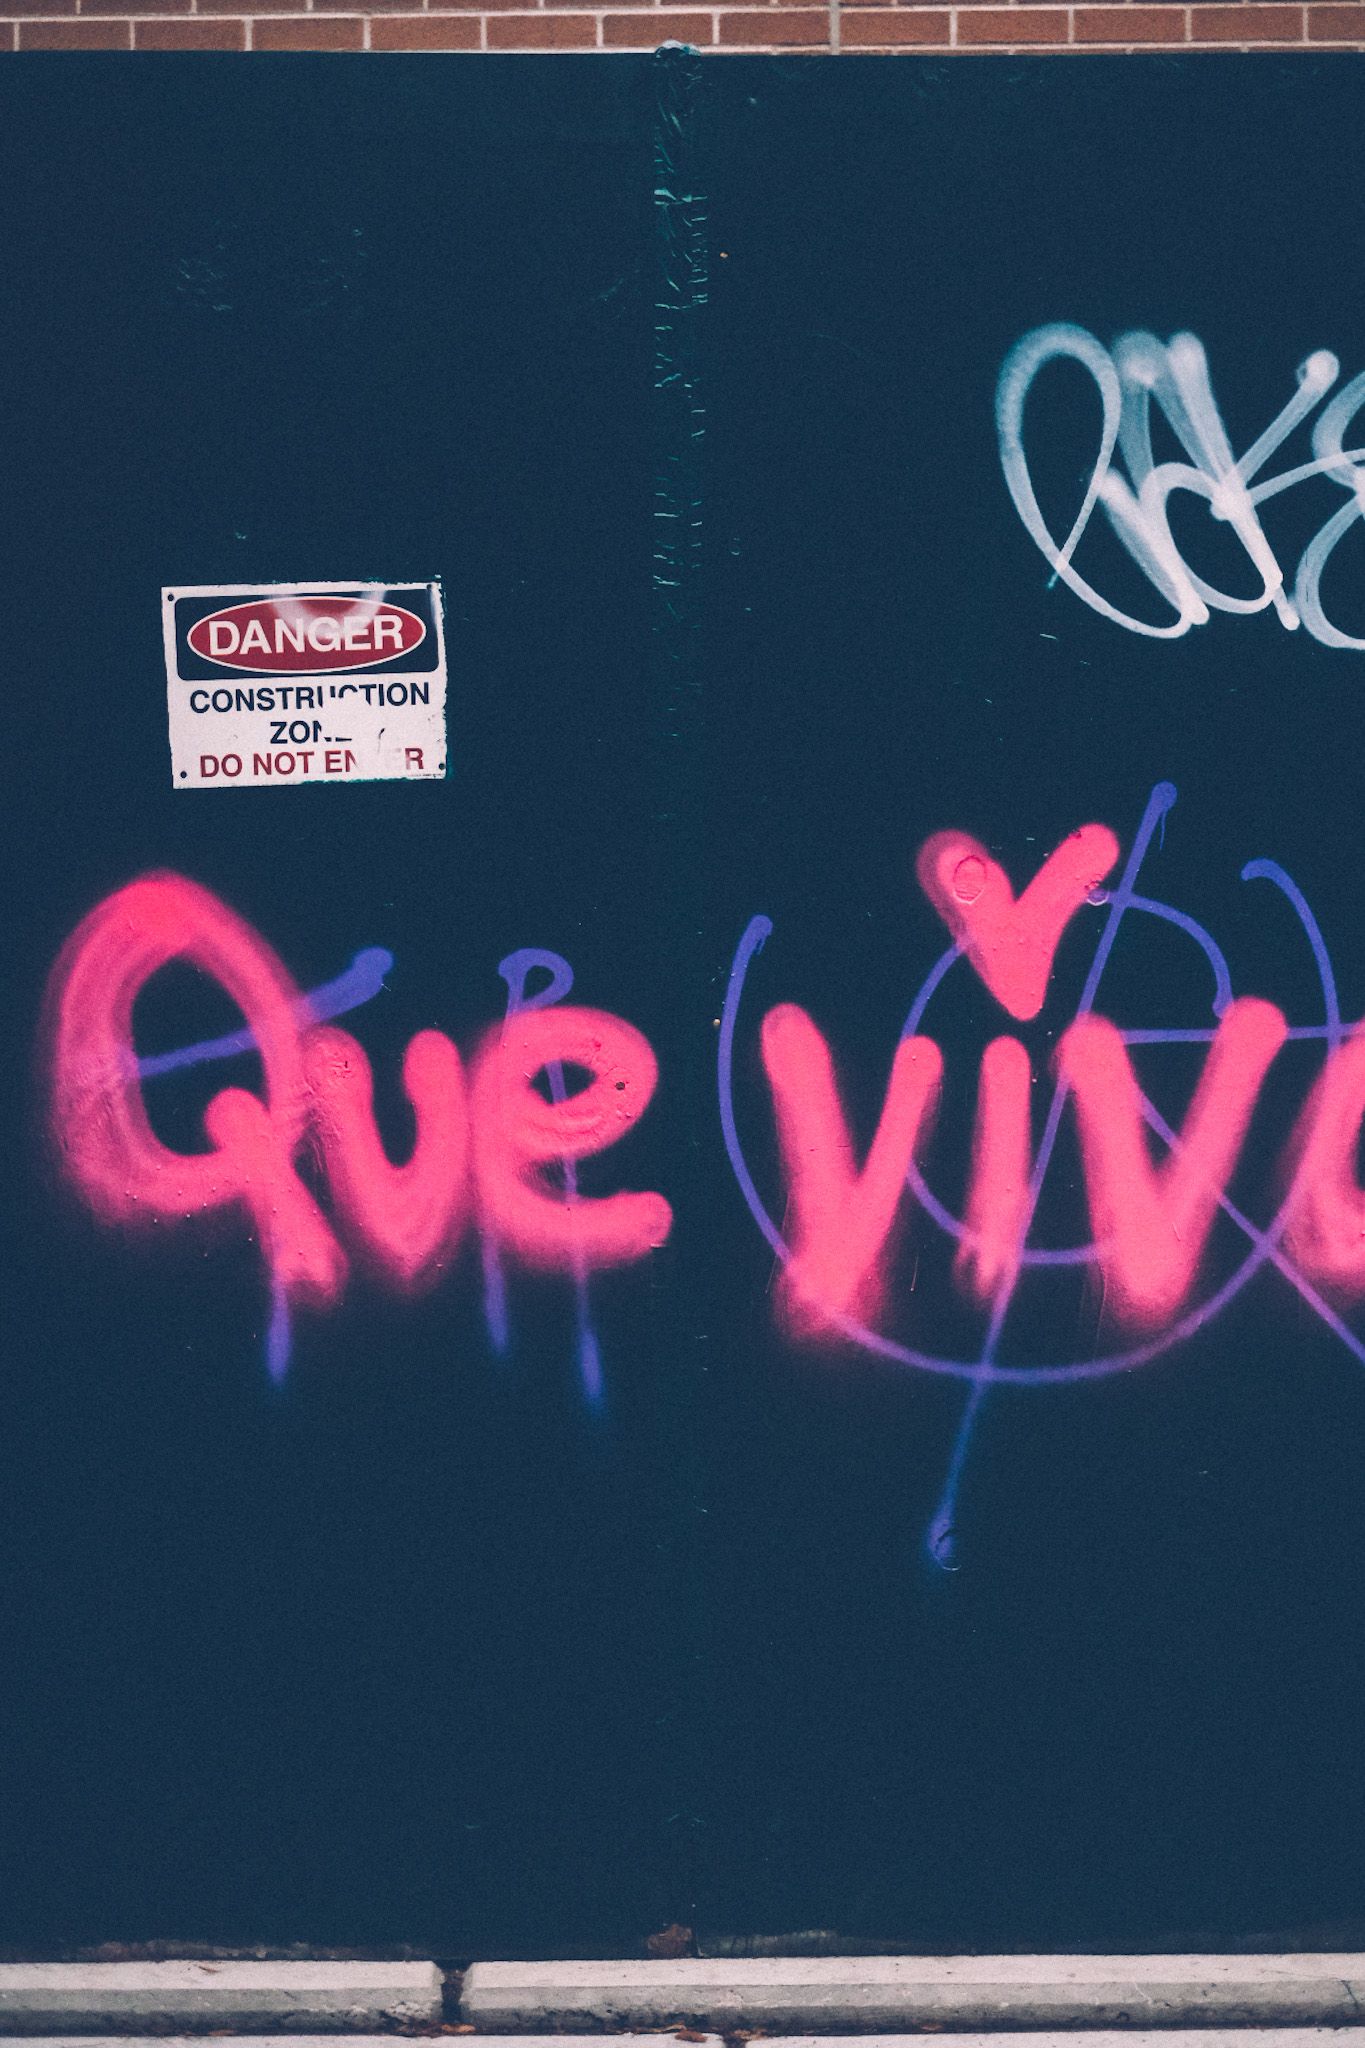 “Que vive” is spray painted in neon pink against a dark temporary construction wall.